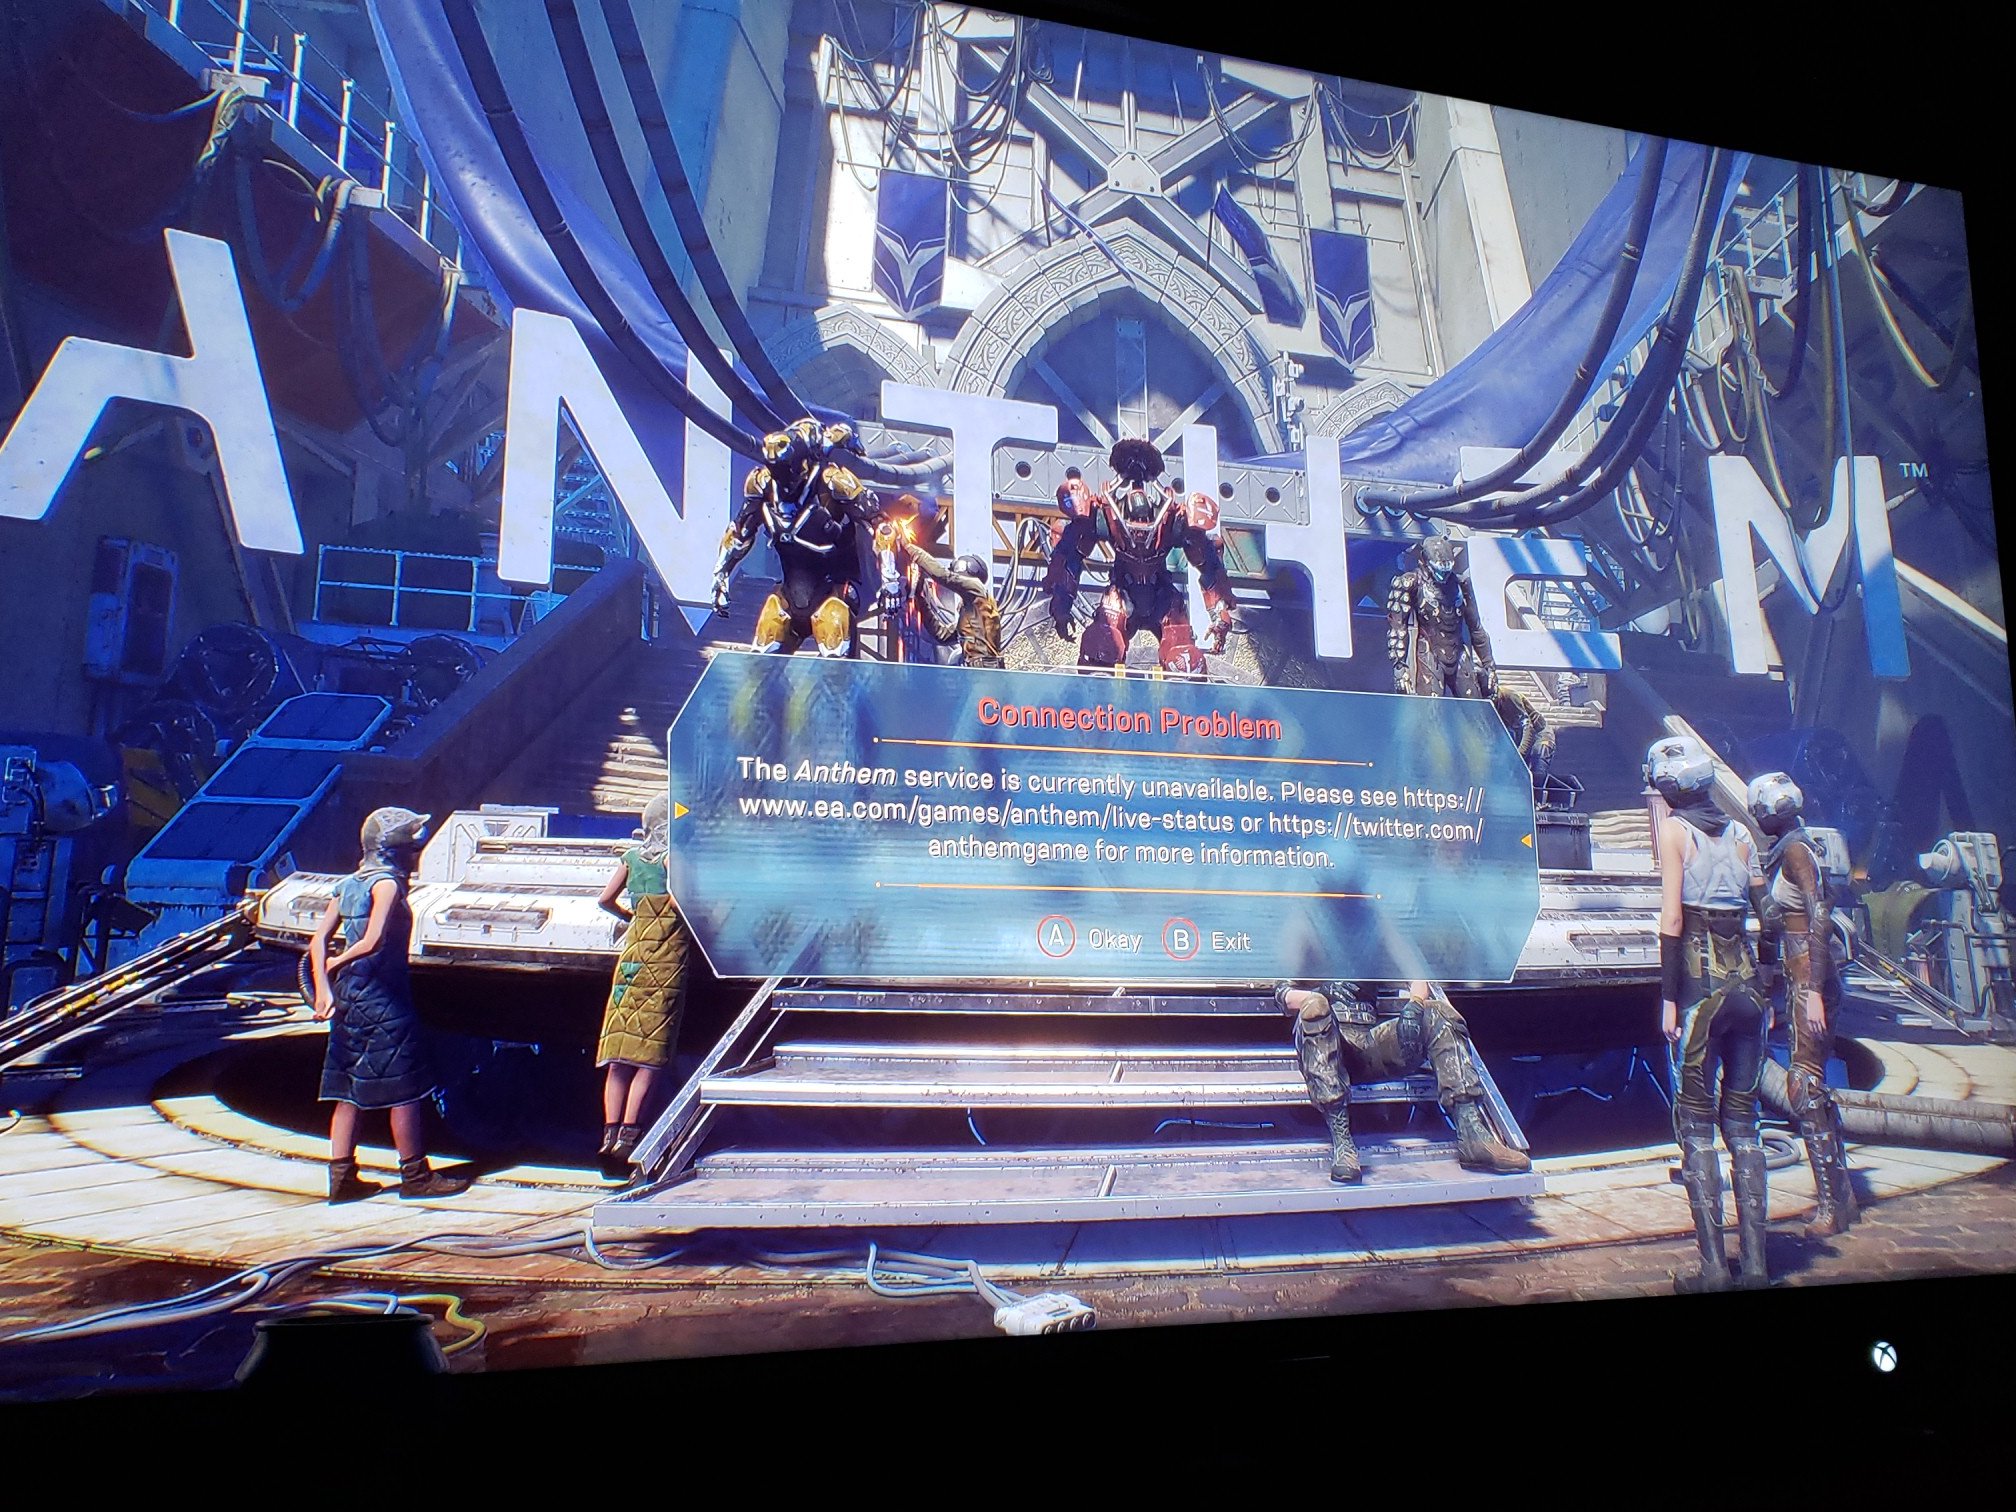 Anthem server connection problems / issues persists for some after emergency maintenance